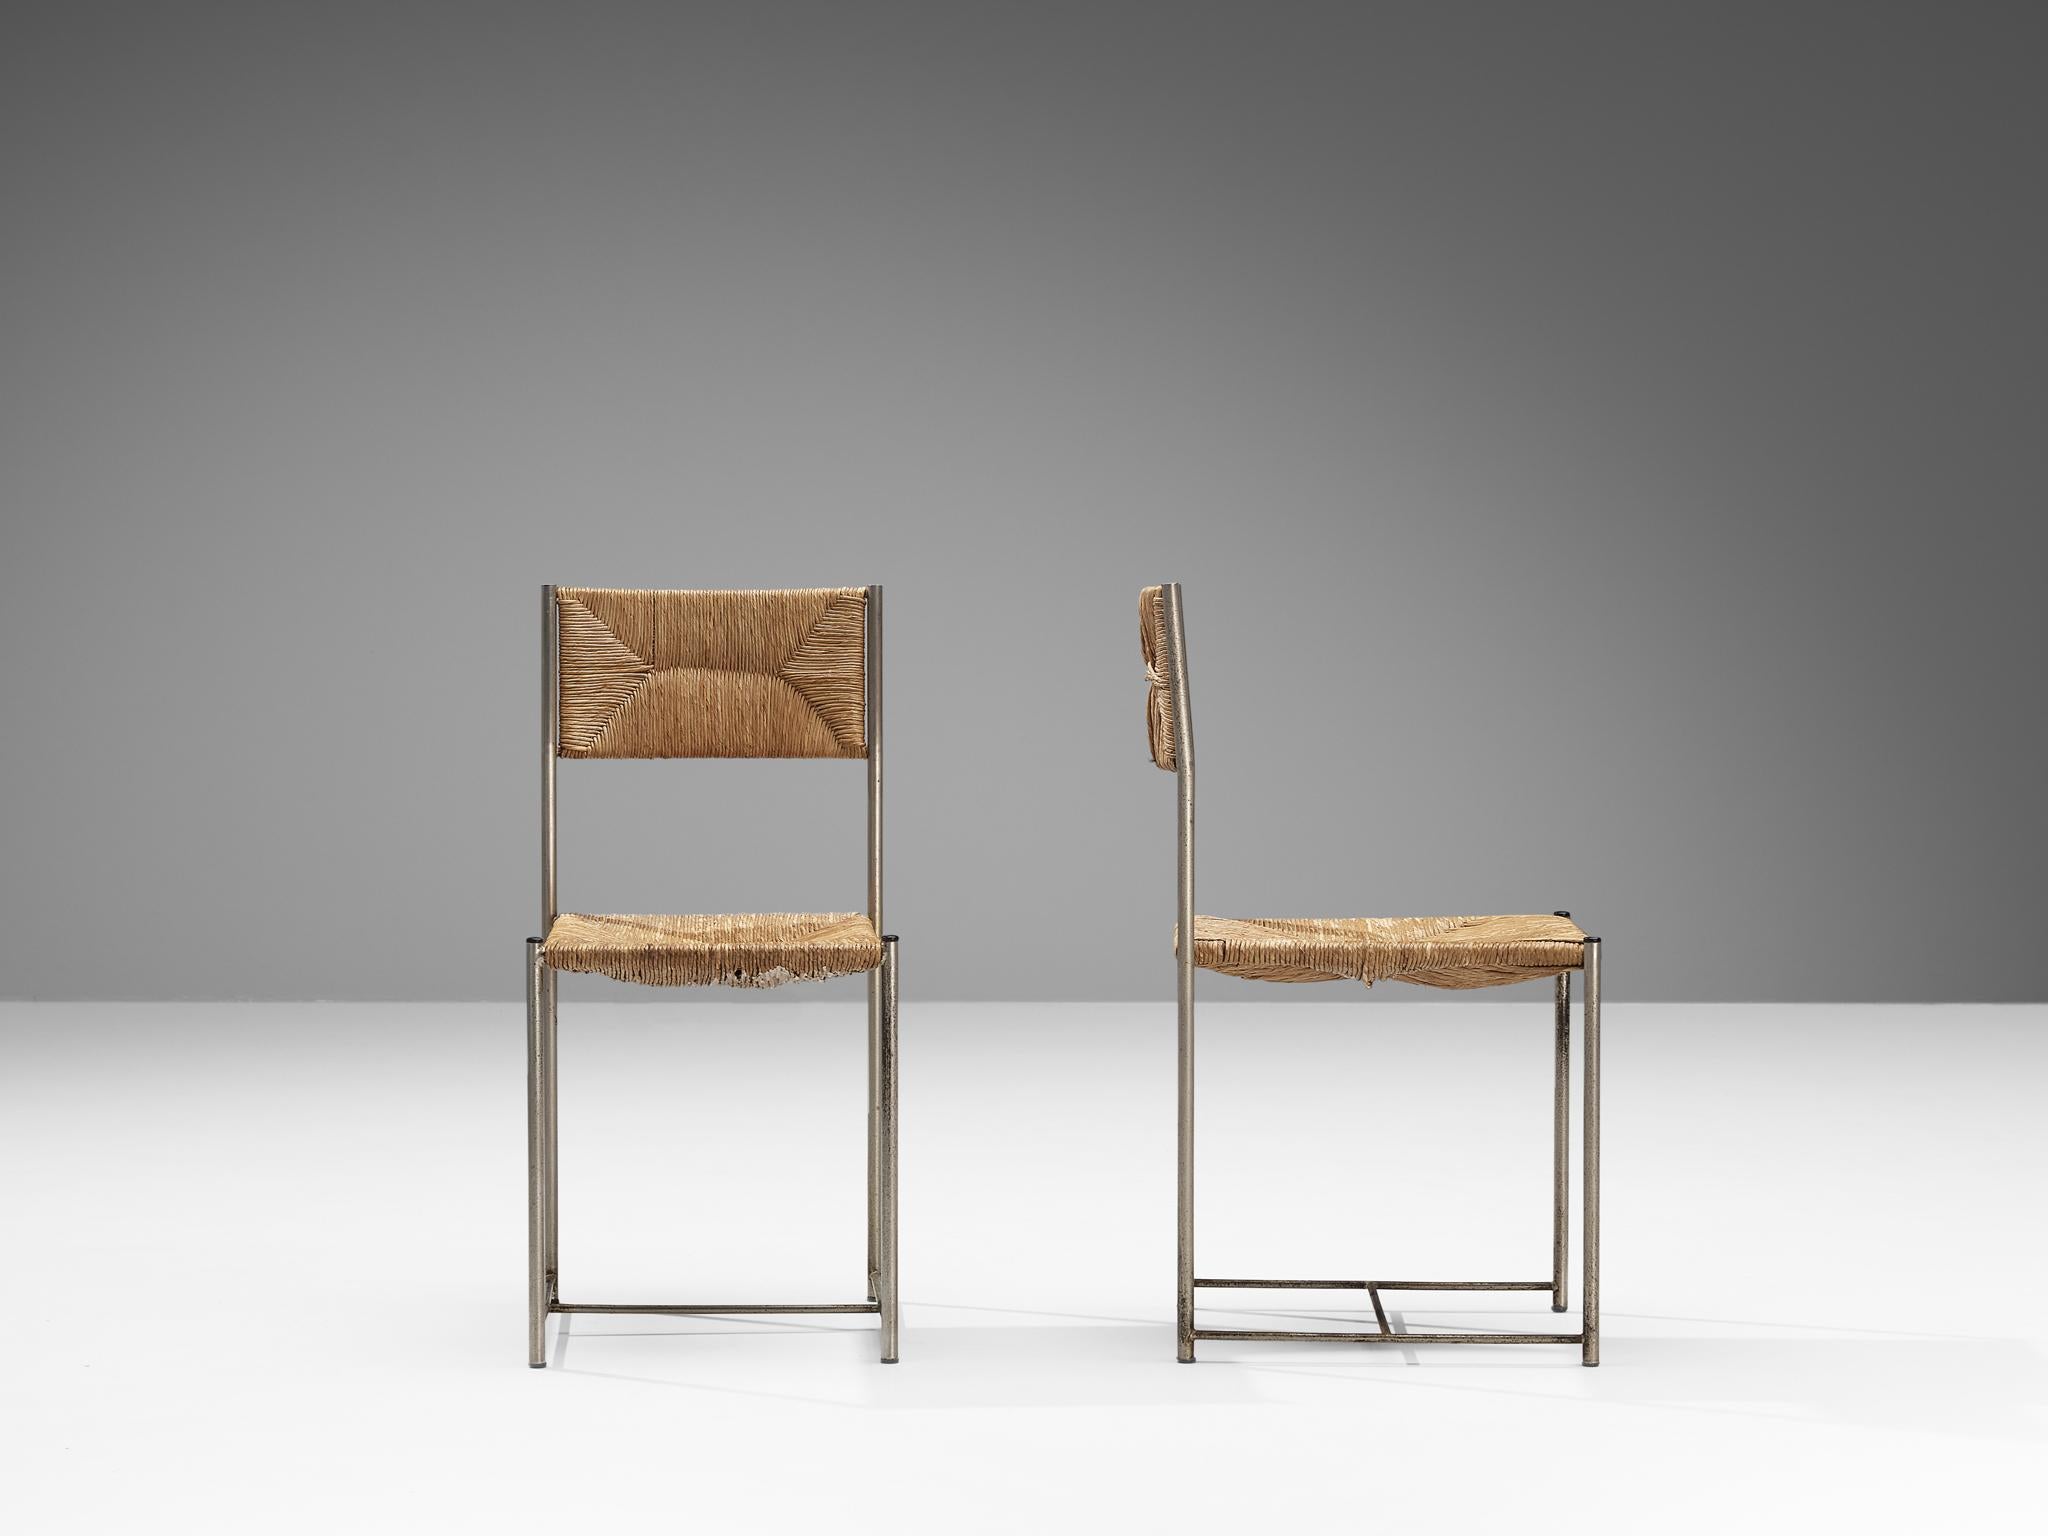 Dining room chairs, patinated steel and straw, Italy, 1970s

A beautiful pair of chairs made in Italy in the 1970s. These chairs are characterized by clear lines and the use of metal in combination with natural material for the seats and